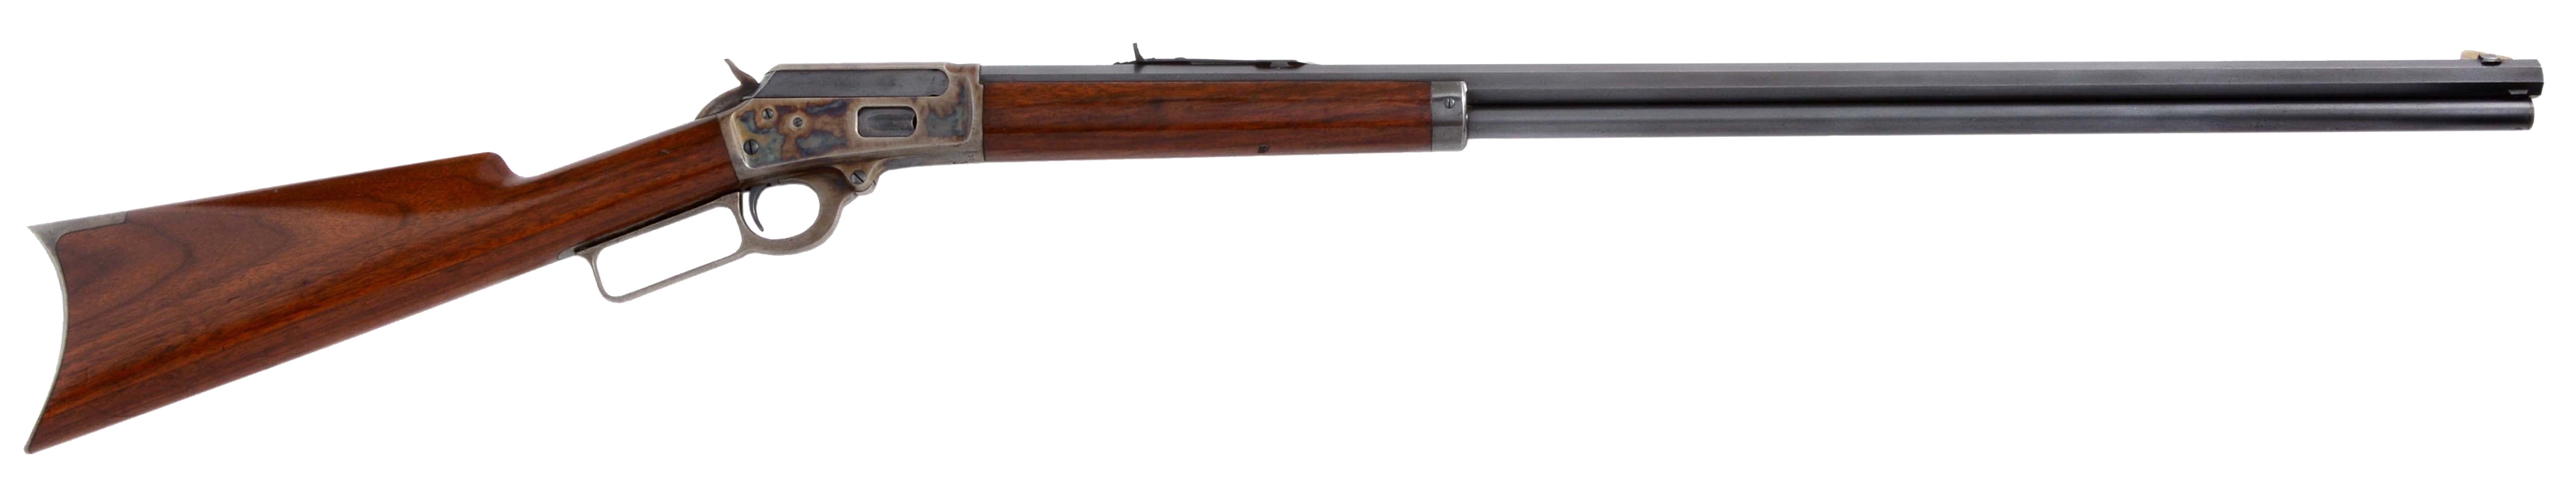 (C) NEAR NEW SPECIAL ORDER MARLIN MODEL 1894 LEVER ACTION RIFLE (1901).